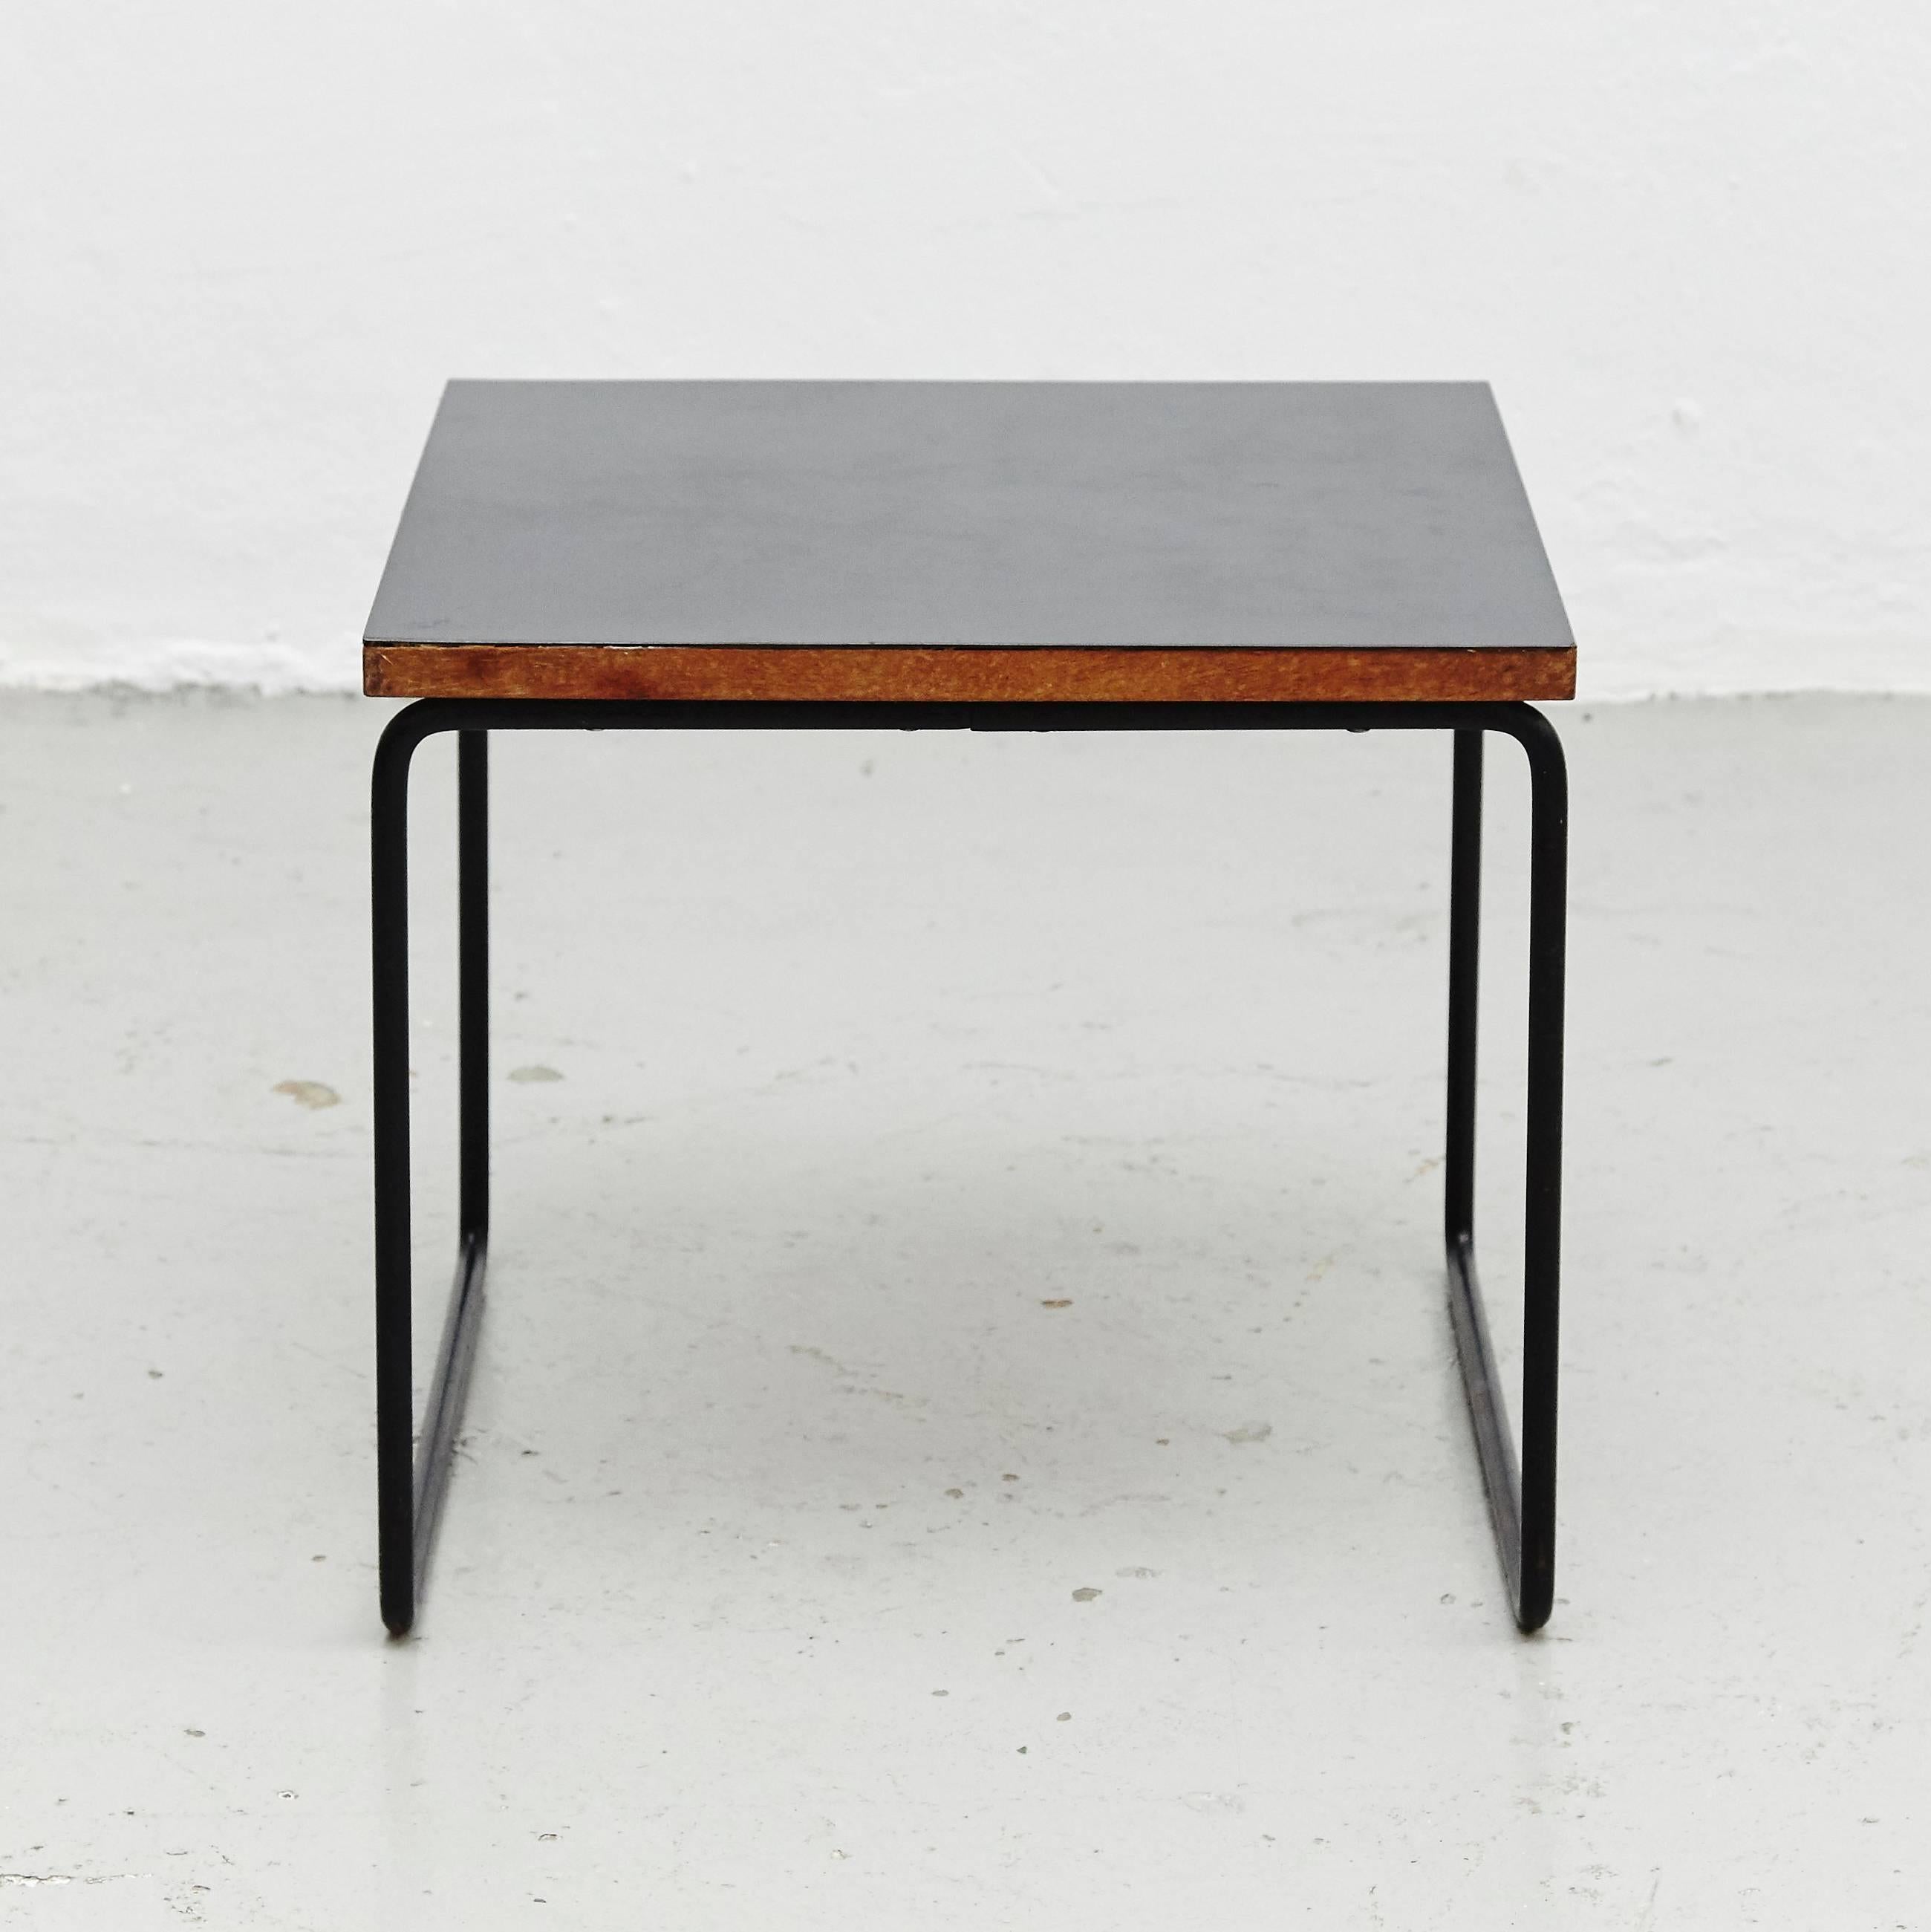 Table designed by Pierre Guariche. 
Manufactured by Steiner, (France), circa 1950. 
Bent and painted iron frame, laminated wood. 

In good original condition, with minor wear consistent with age and use, preserving a nice patina. 

Guariche